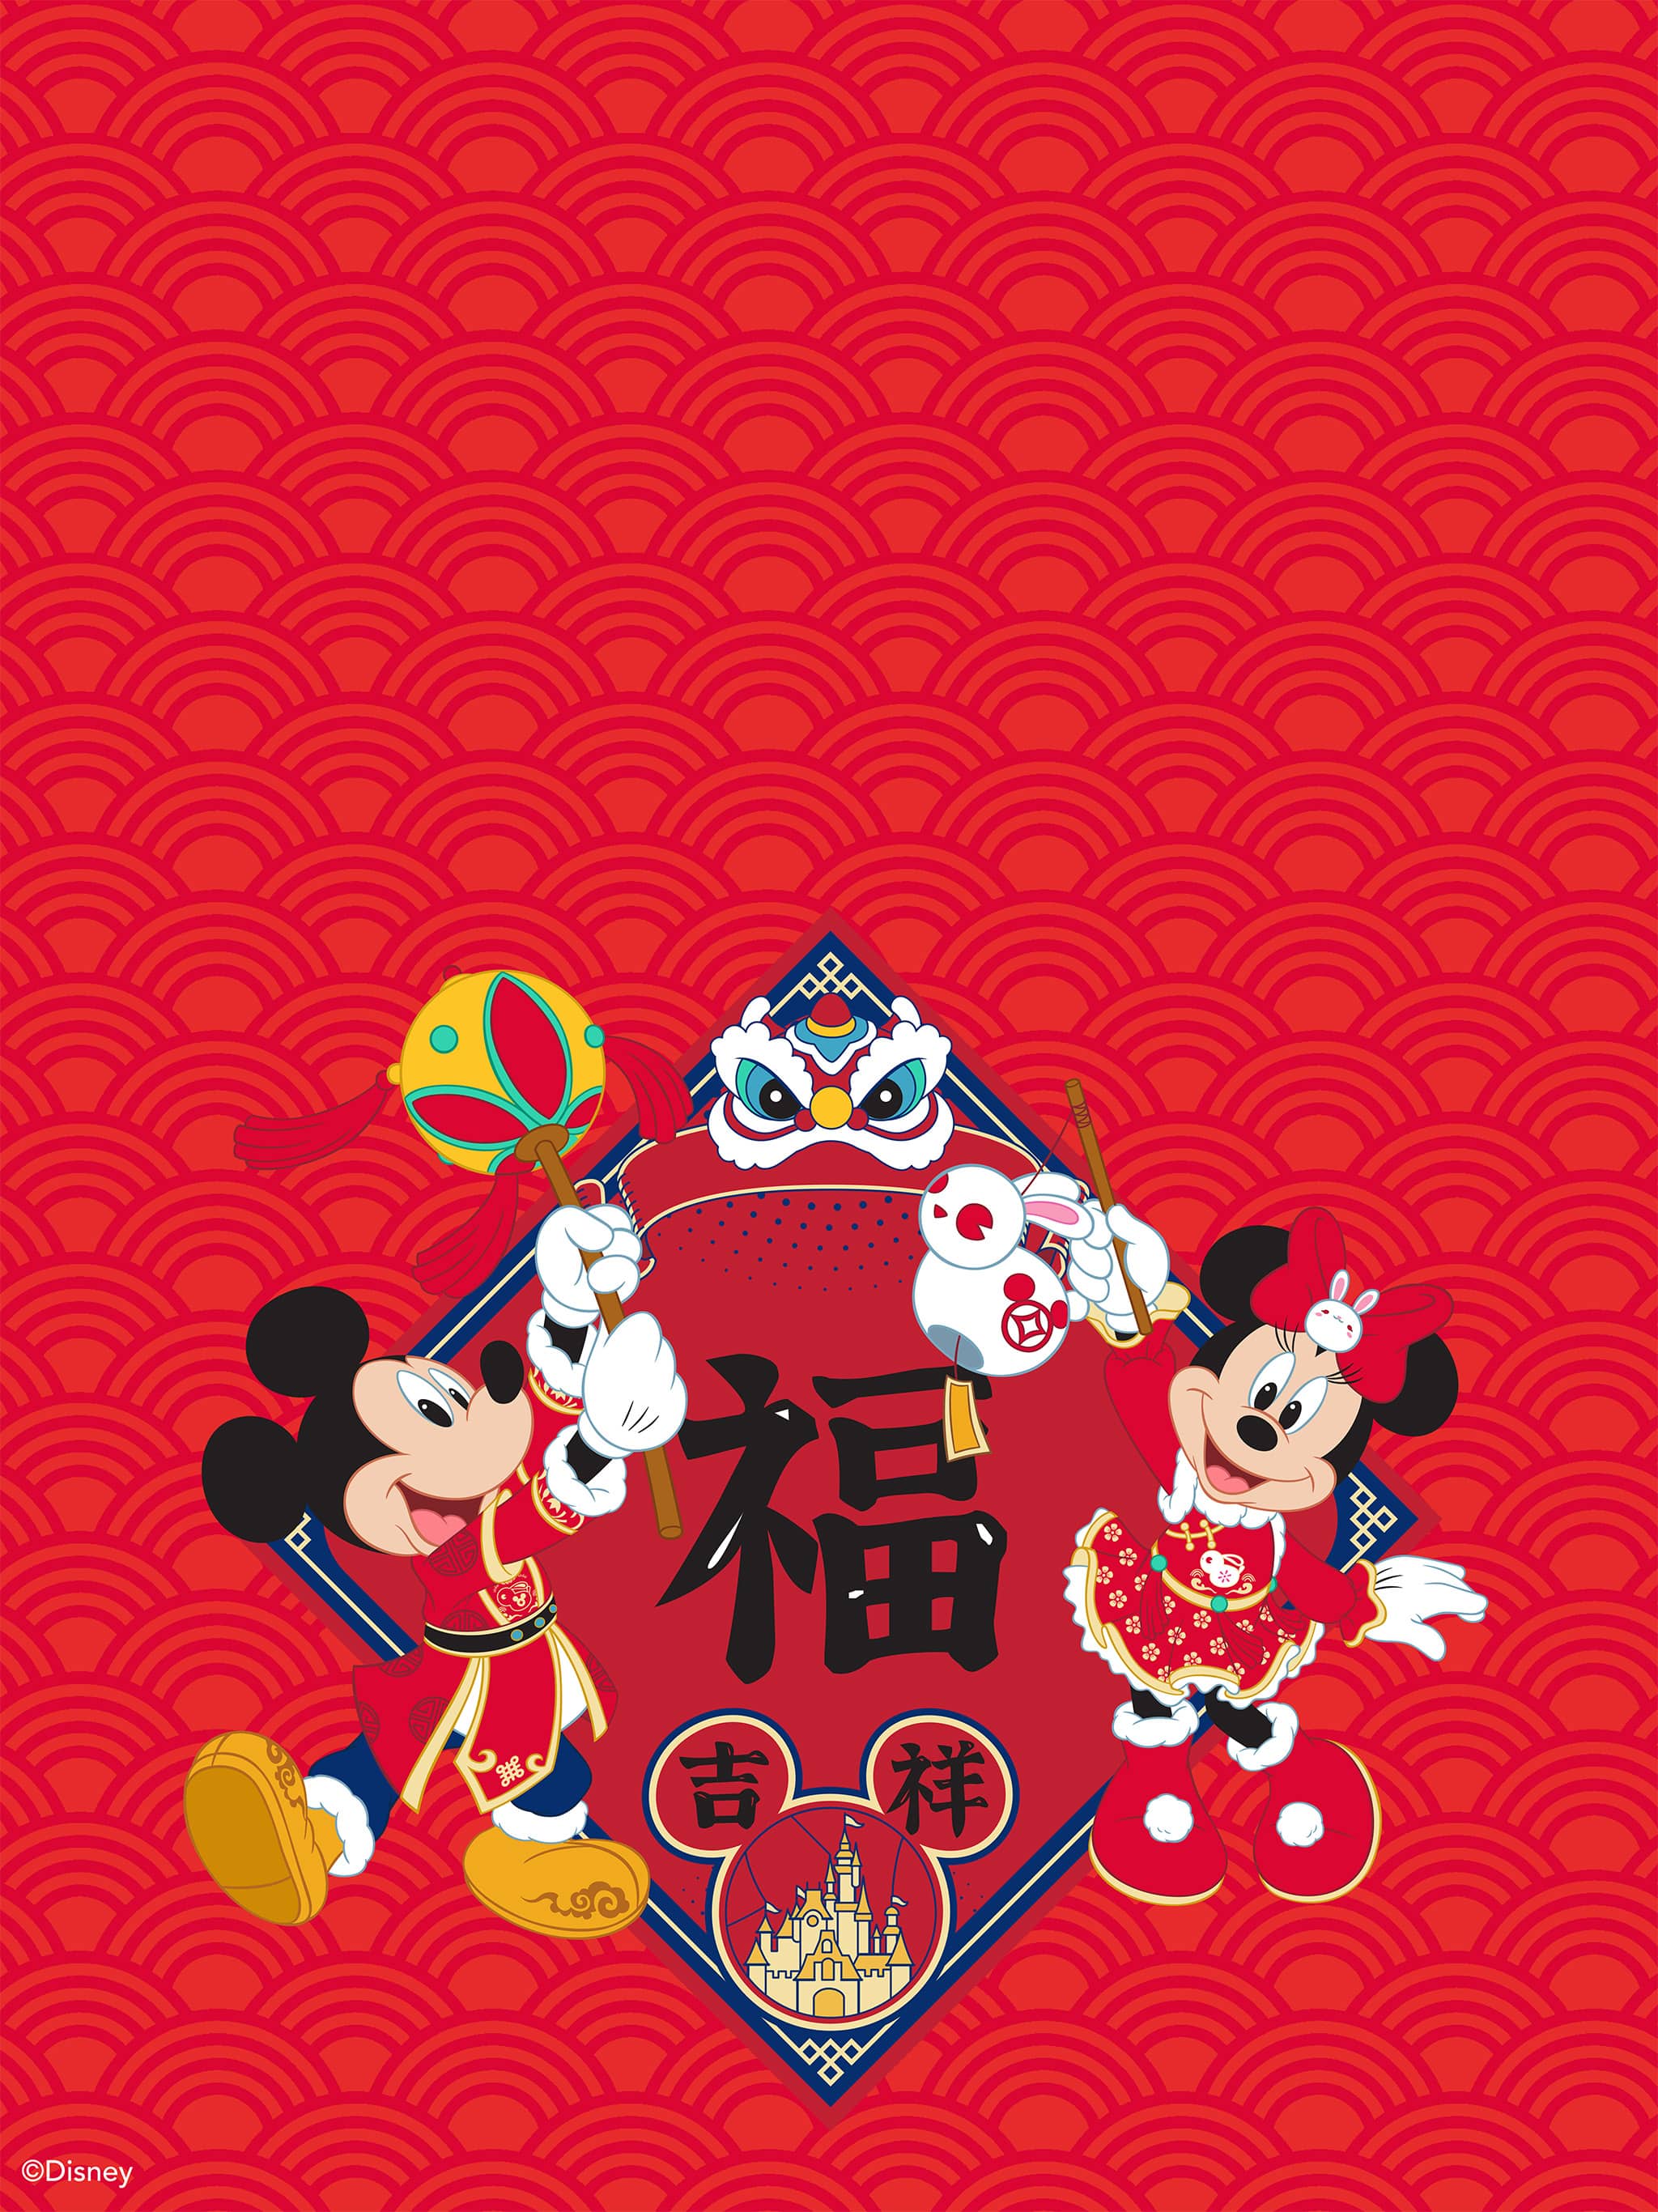  Minnie Mouse Hintergrundbild 2048x2732. Happy Lunar New Year 2023 With Mickey Mouse And Minnie Mouse Wallpaper -Desktop IPad Zoom Background. Disney Parks Blog